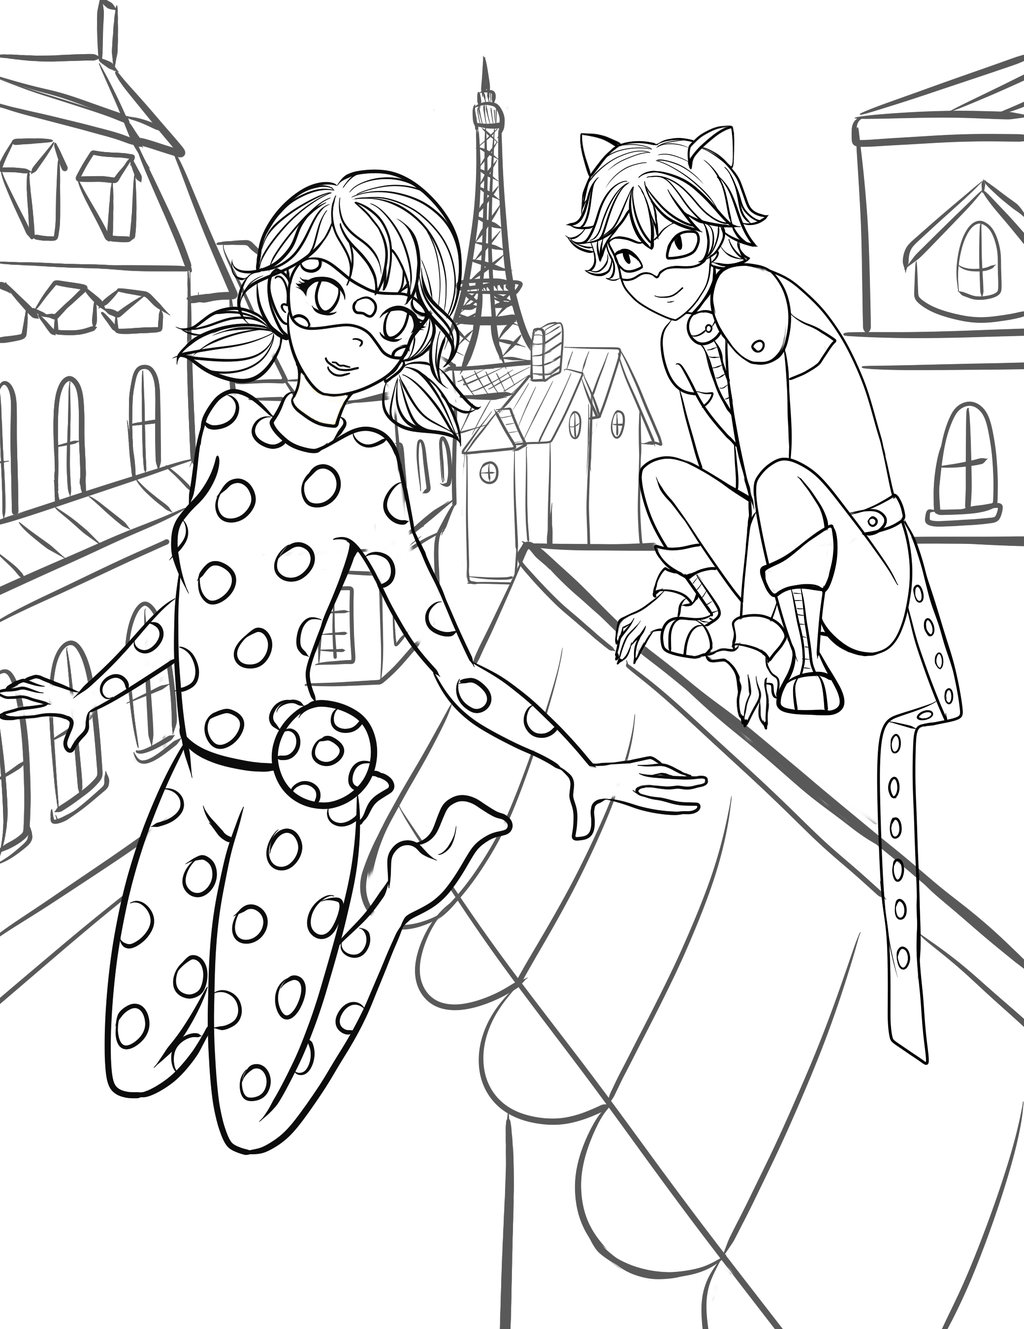 Free Ladybug And Cat Noir Coloring Pages to print for kids Download print and color